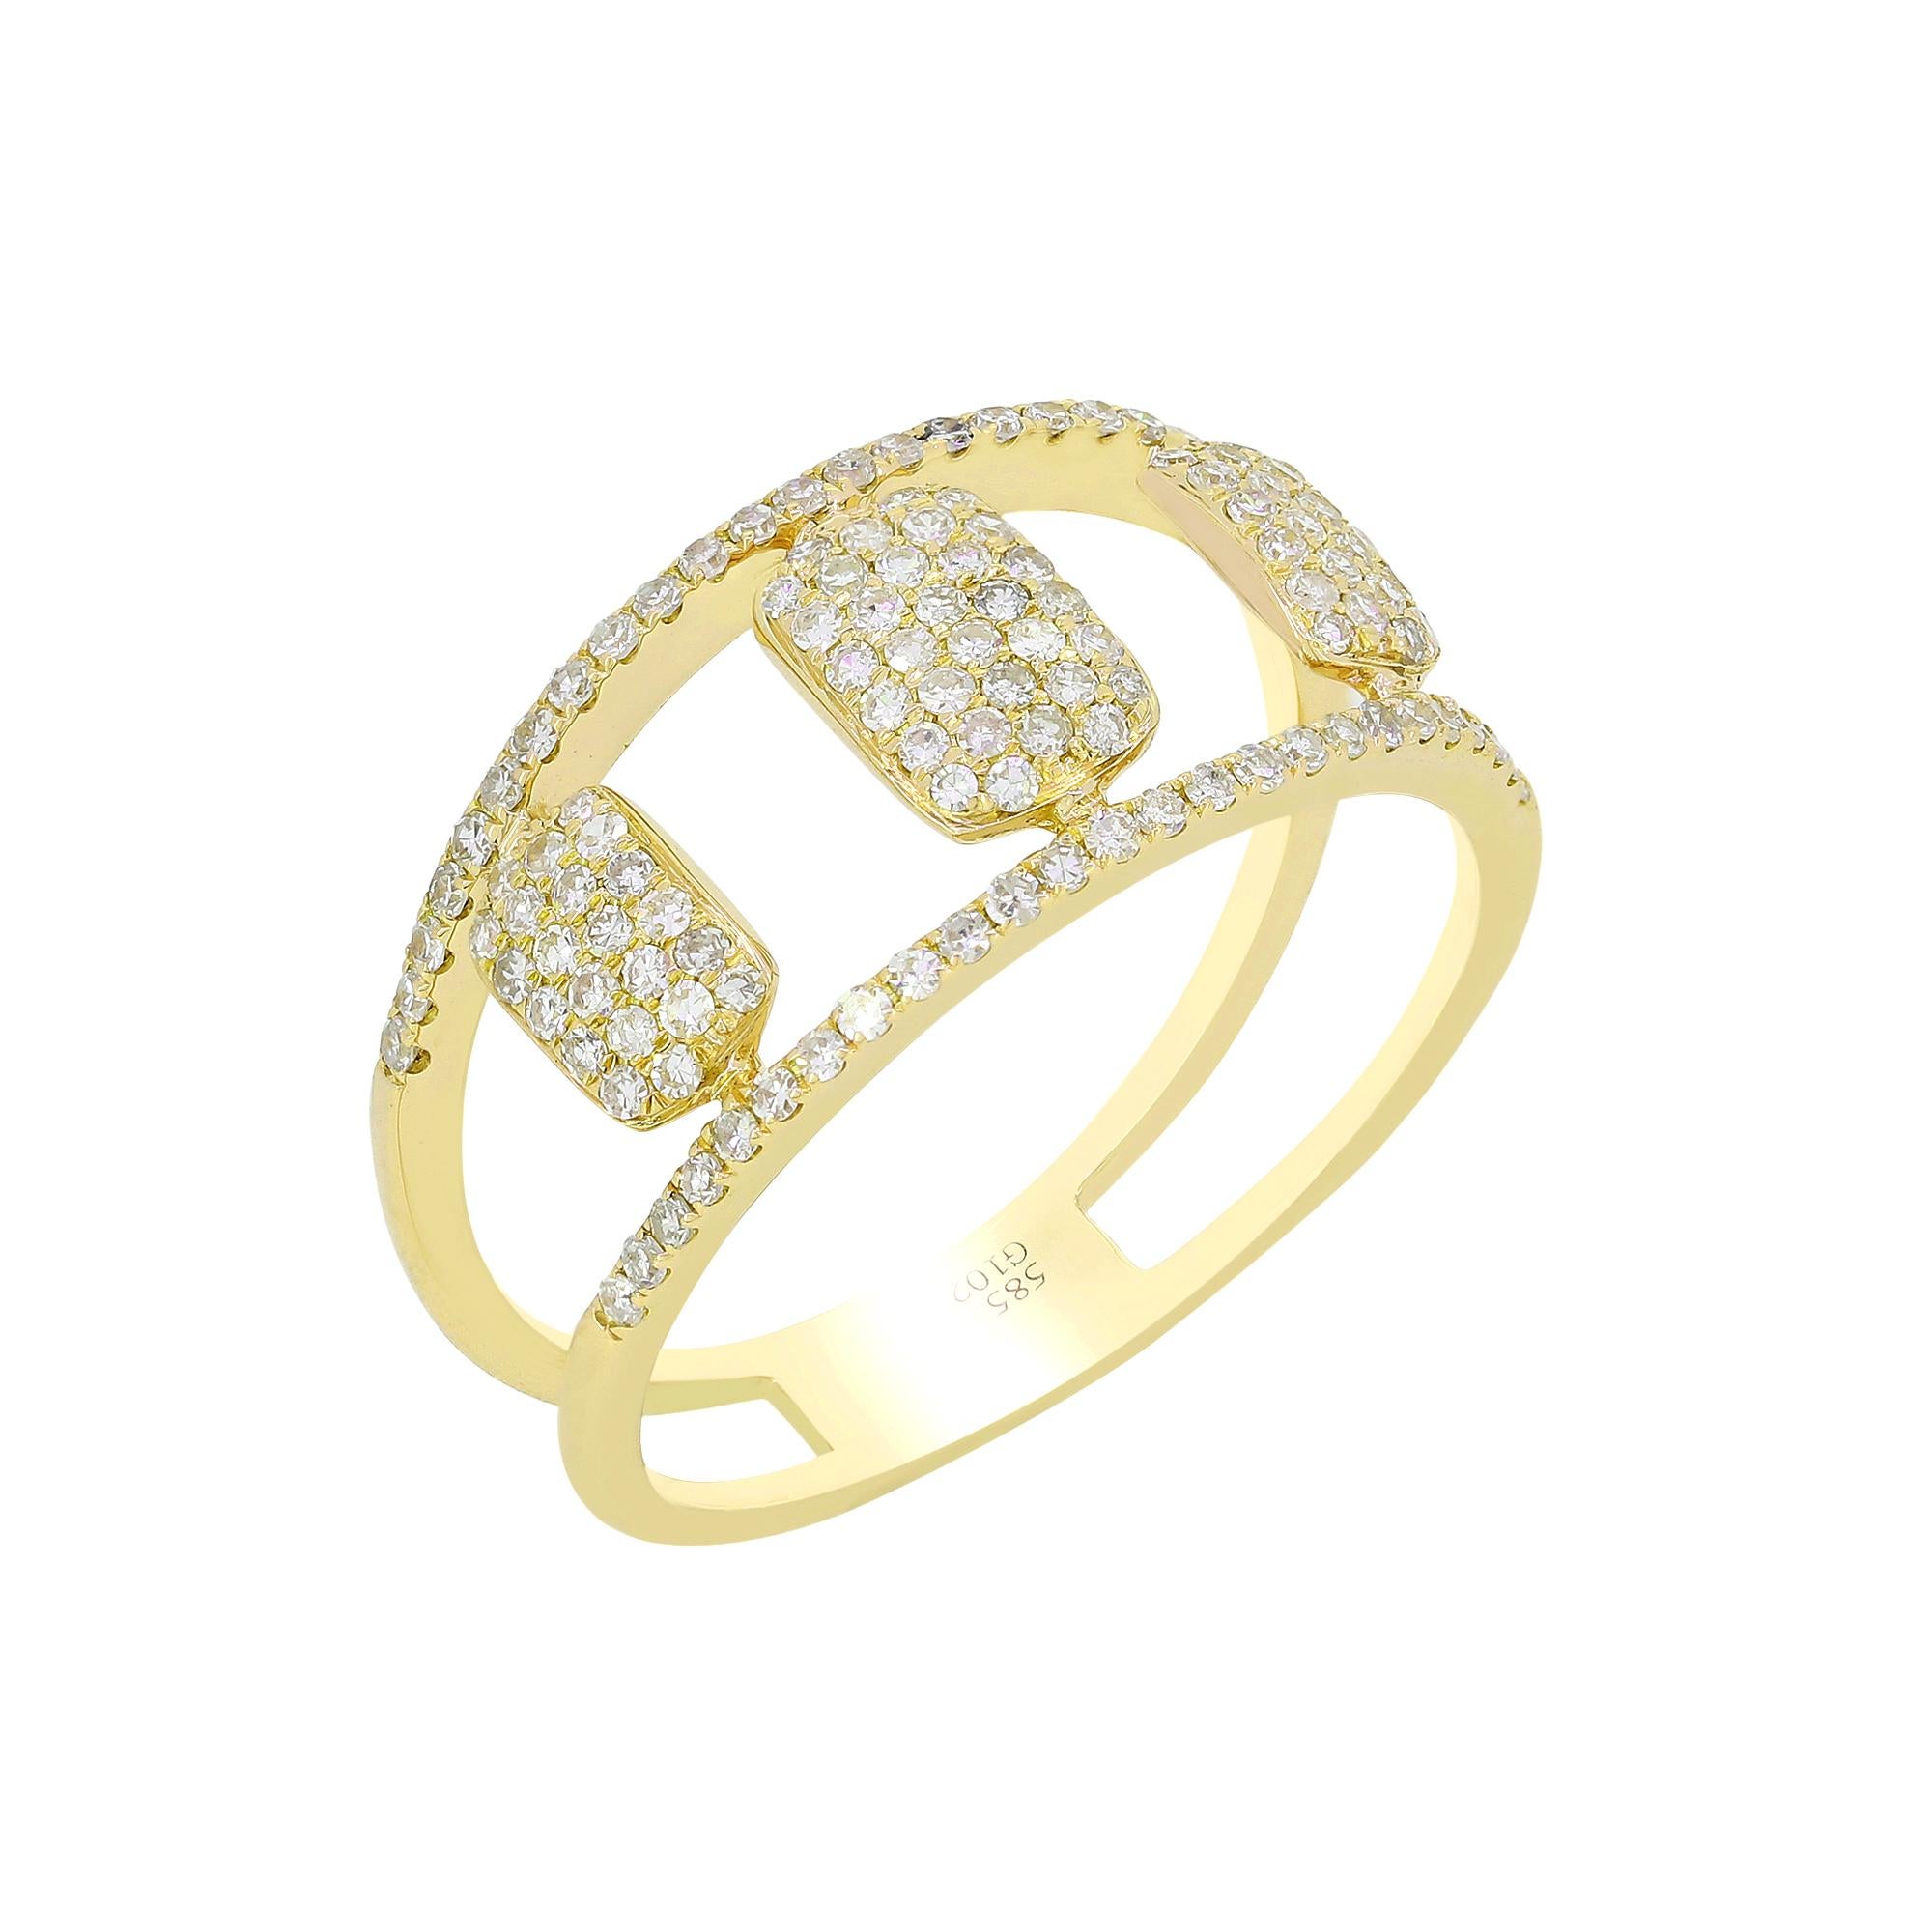 Glamorously attractive, this Luxle split shank ring in 14K yellow gold is featured with rectangle shaped motifs embellished with diamonds. Each ring is made with 126 round diamonds set in micro pave.

Please follow the Luxury Jewels storefront to